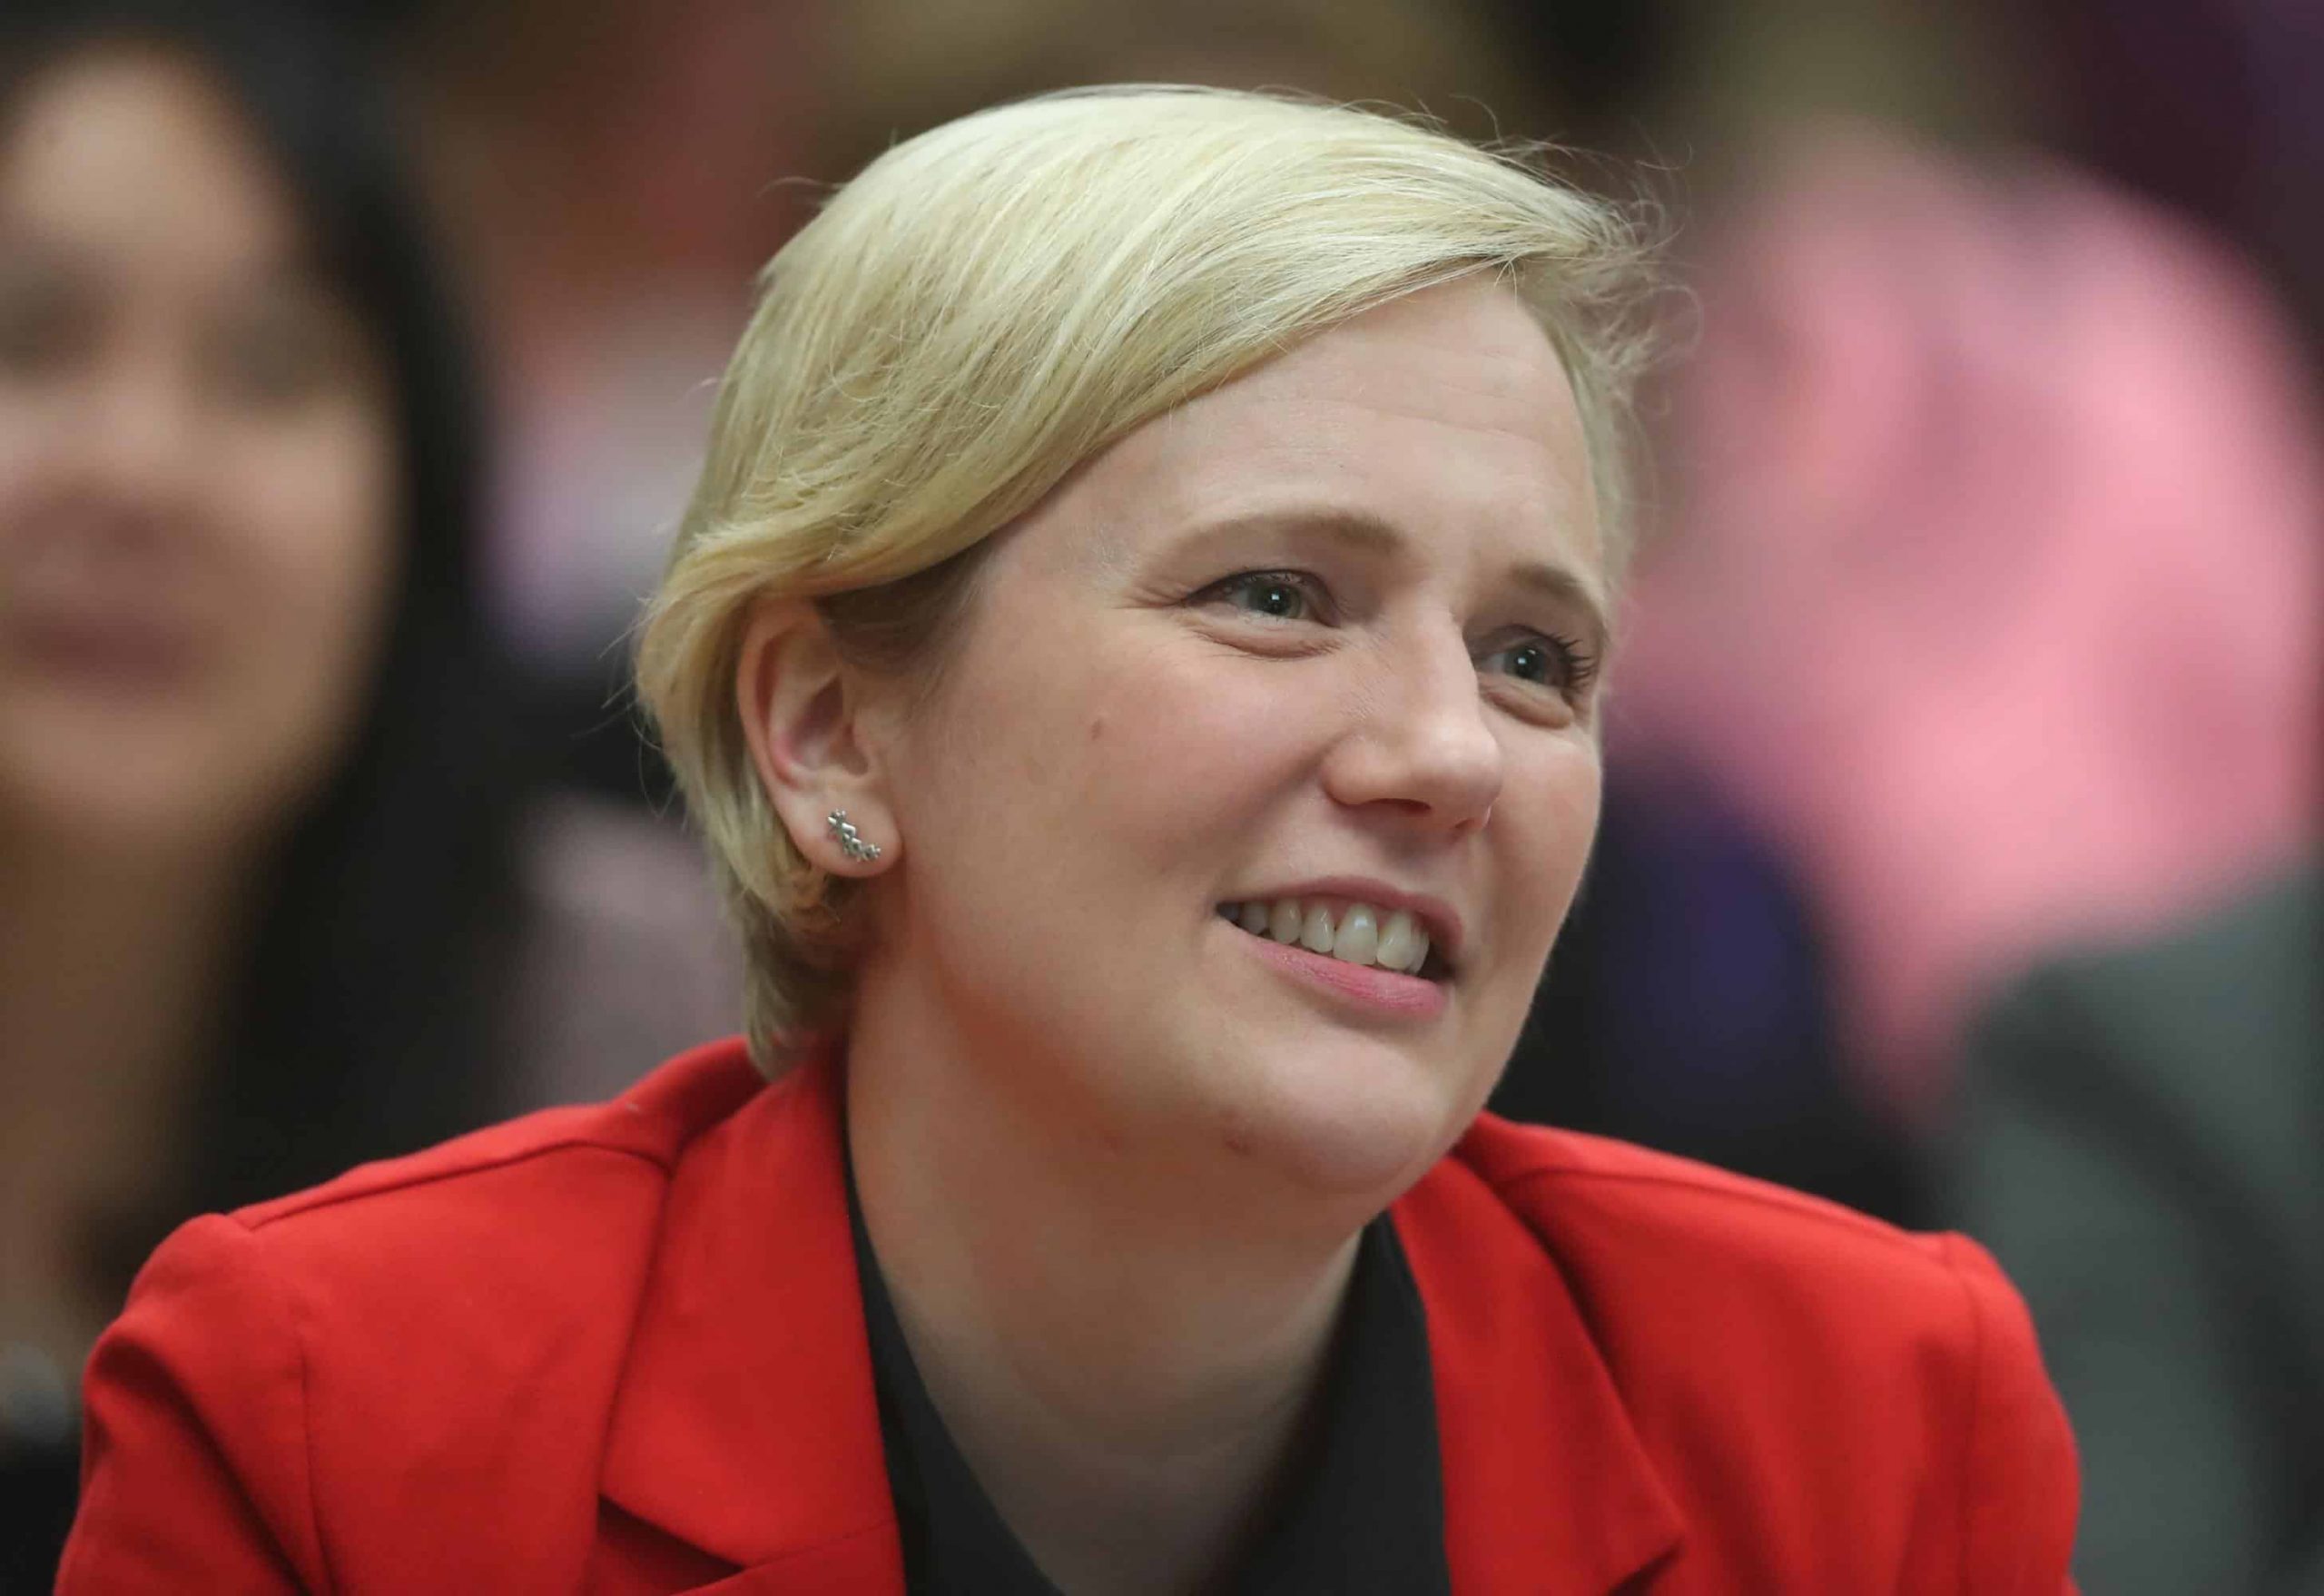 Anti-abortion billboard targeted at Labour MP Stella Creasy removed